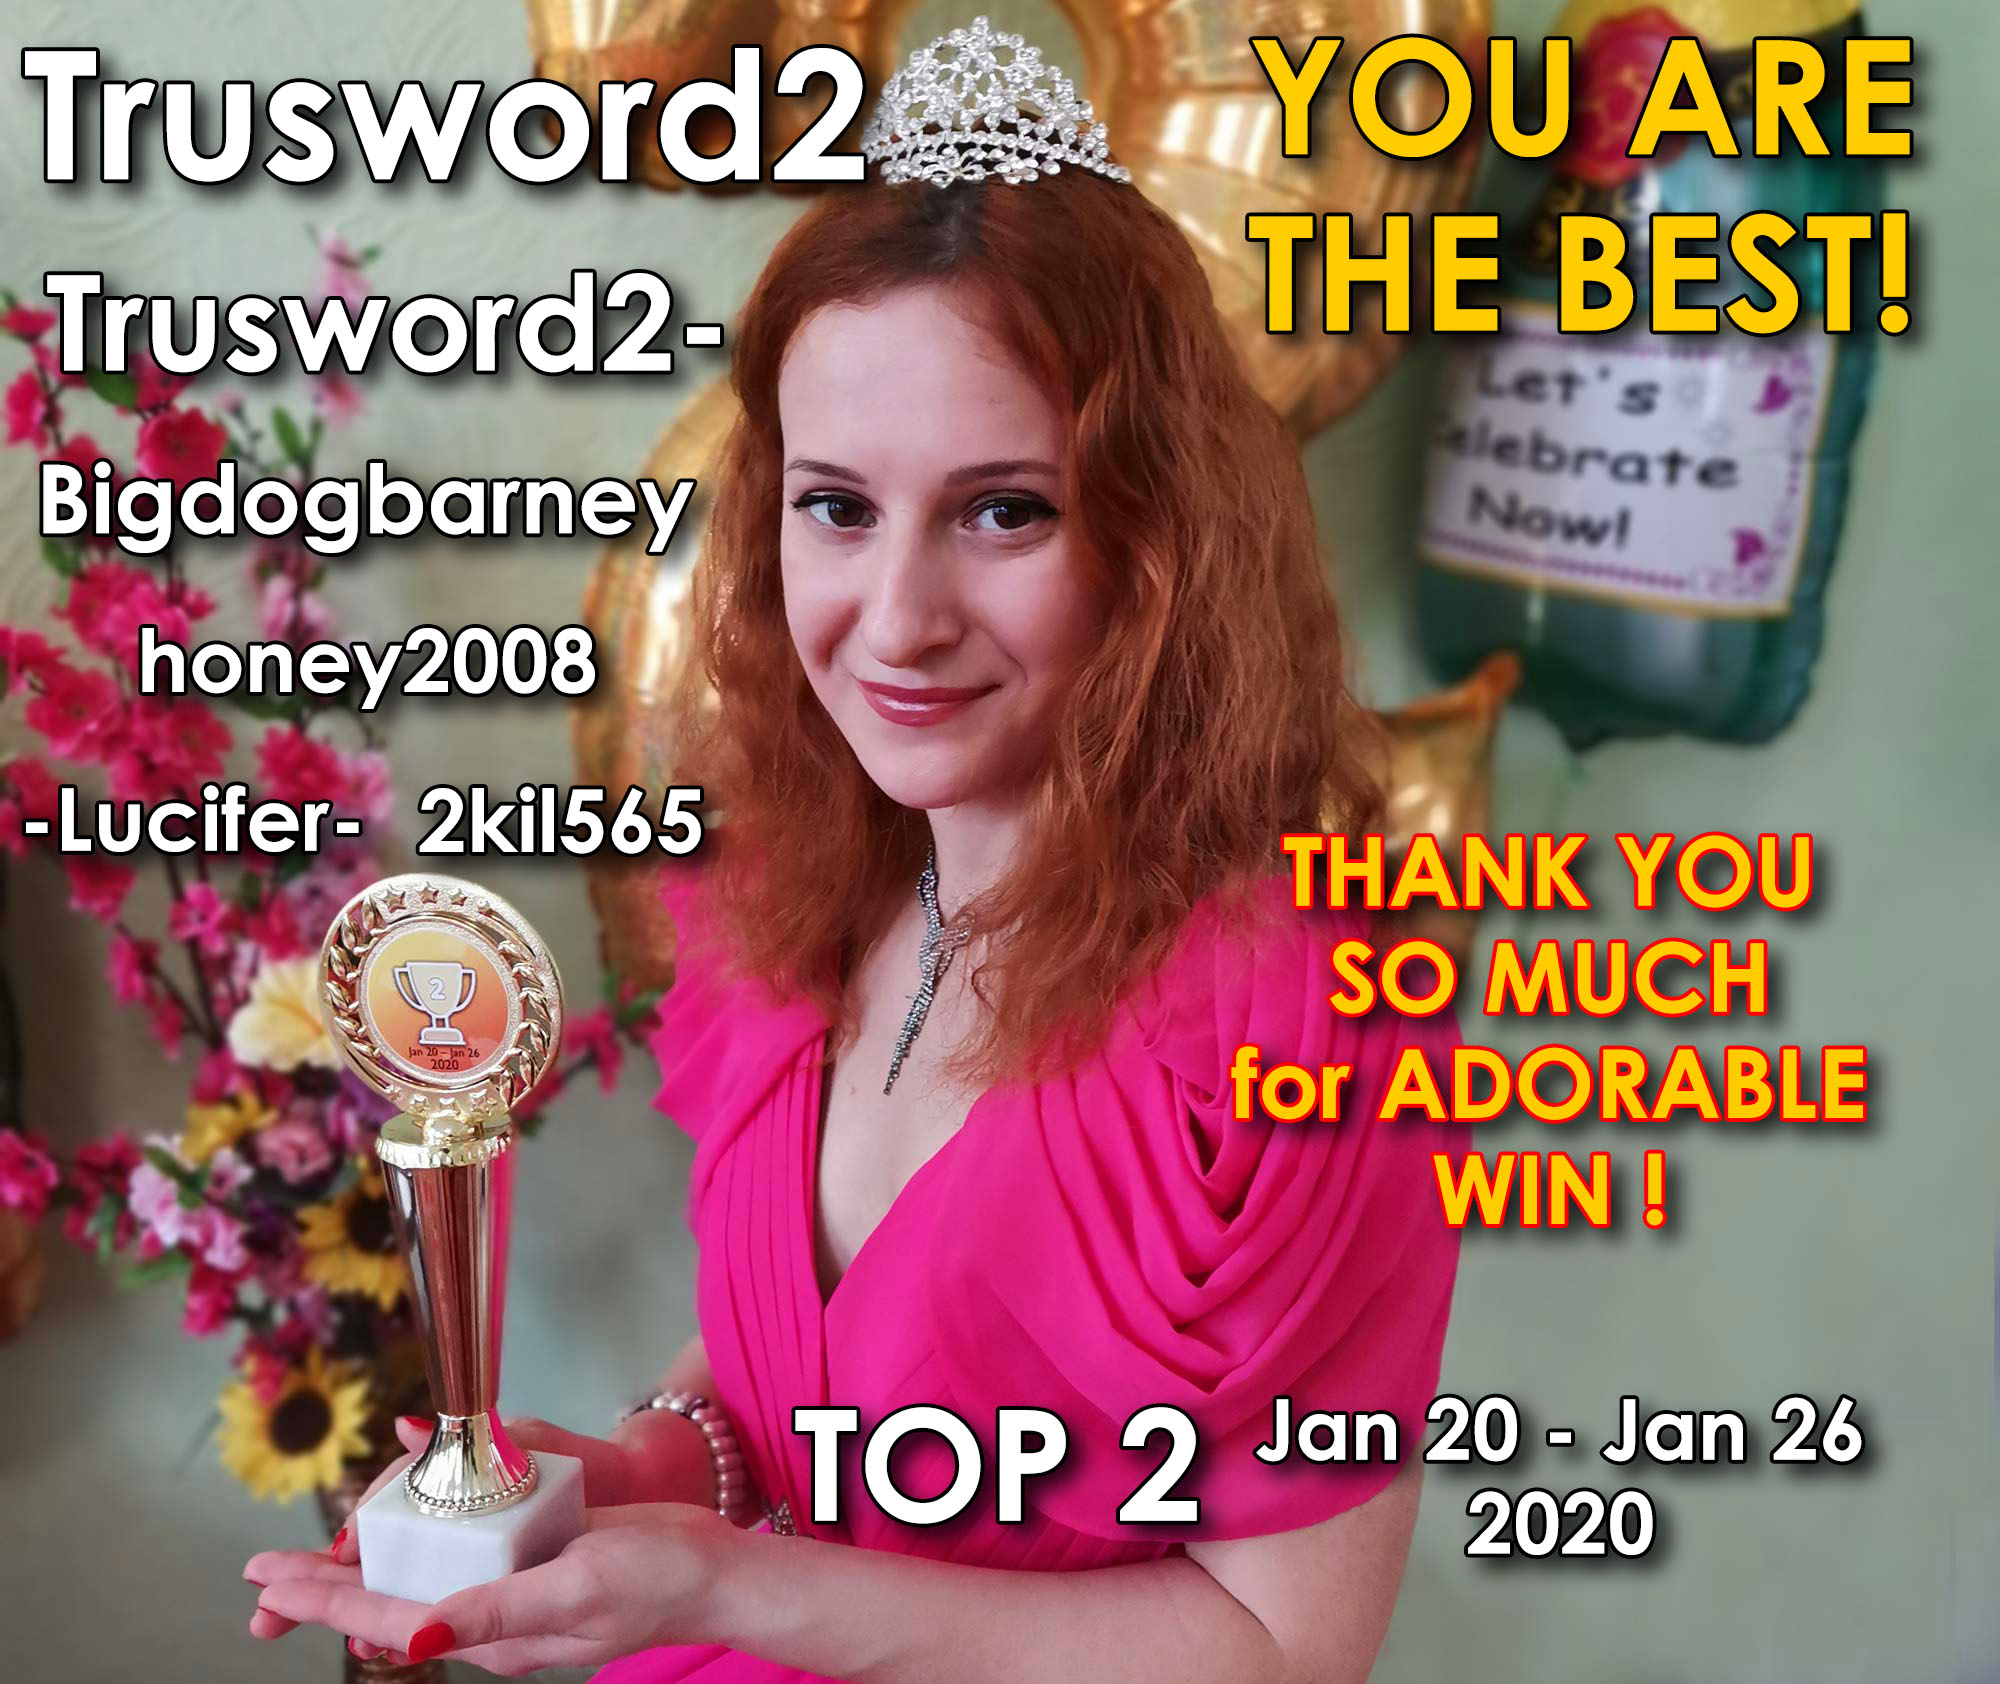 ladybigsmile Thank You So Much for Amazing Highest Wins TOP 2 & 3 in 2018 & 2020 ! That was Incredible! Will REMEMBER it FOREVER!!!!! image: 1